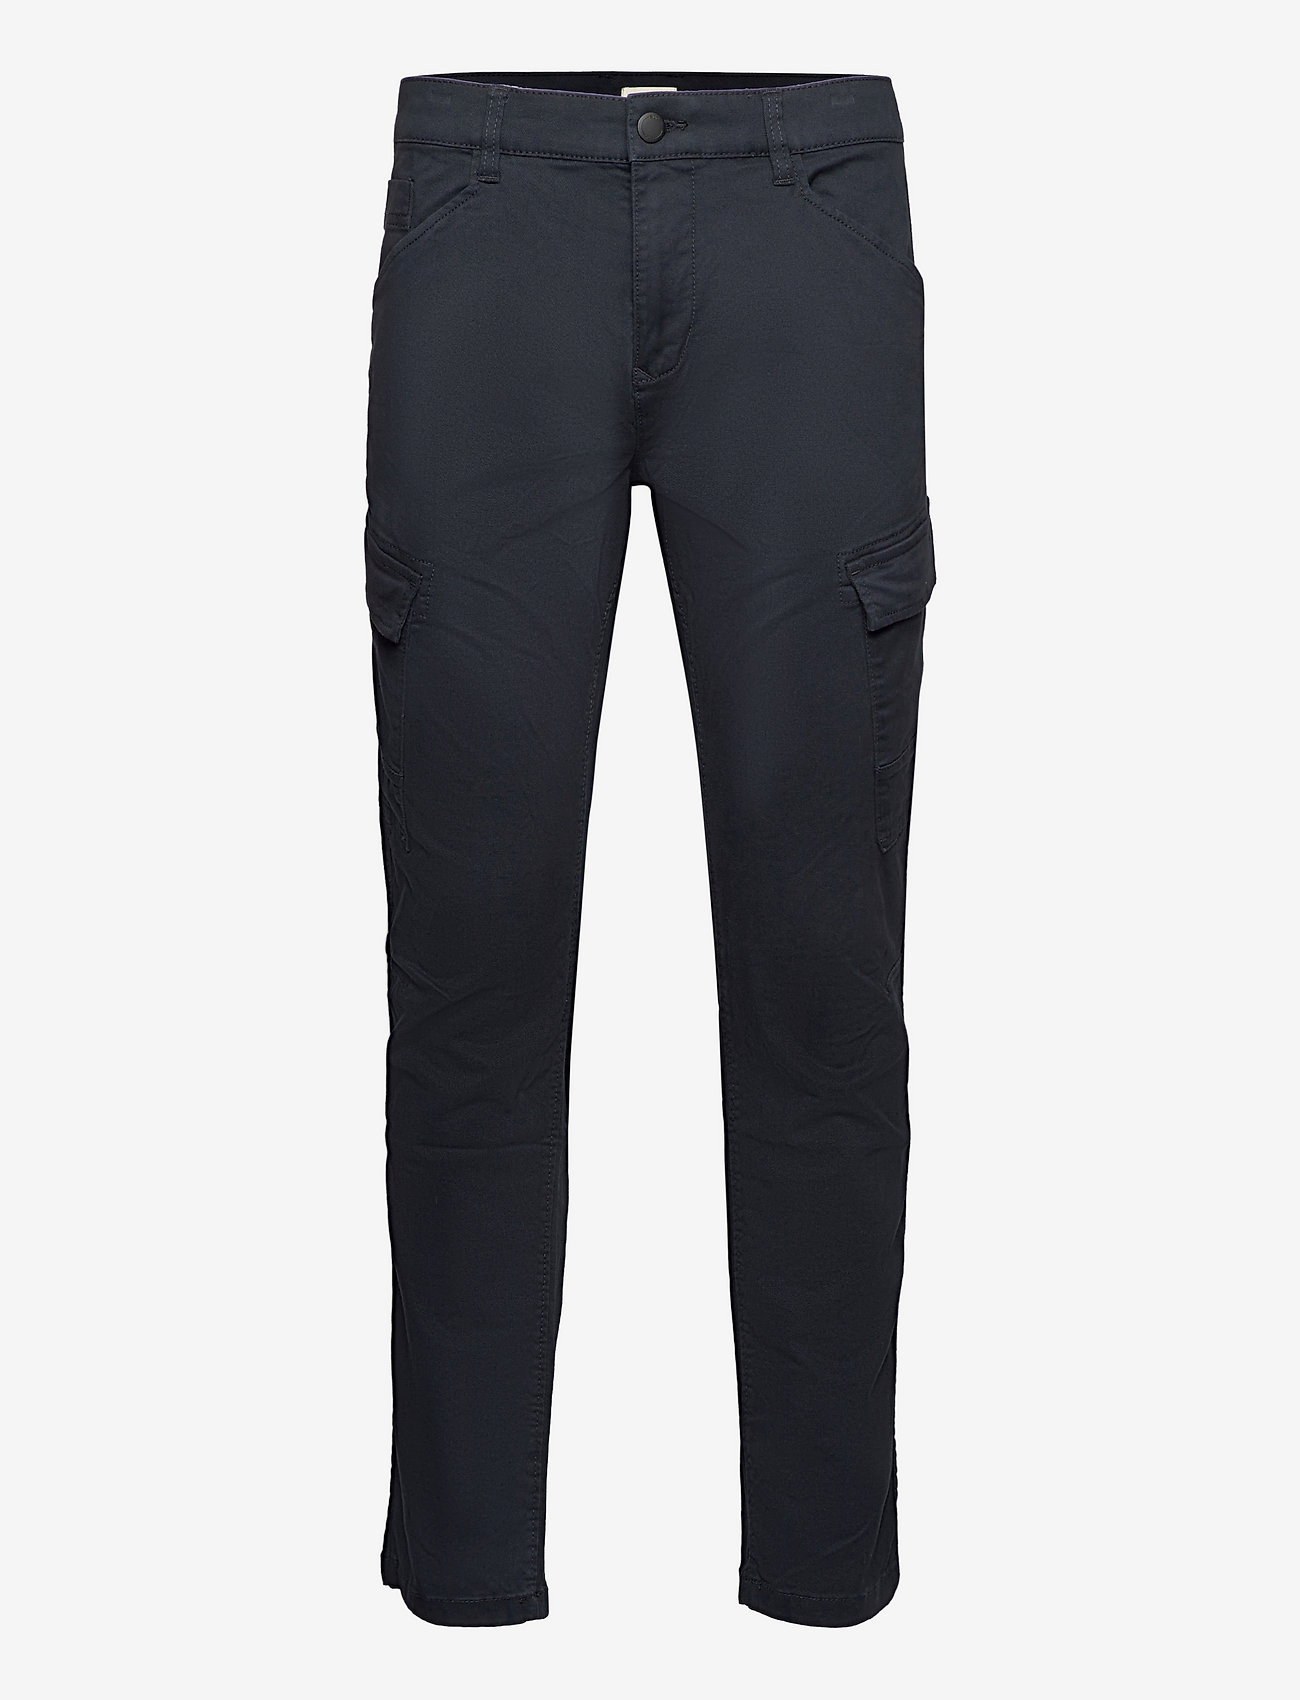 EDC by Esprit - Pants woven - chinos - dark blue - 0